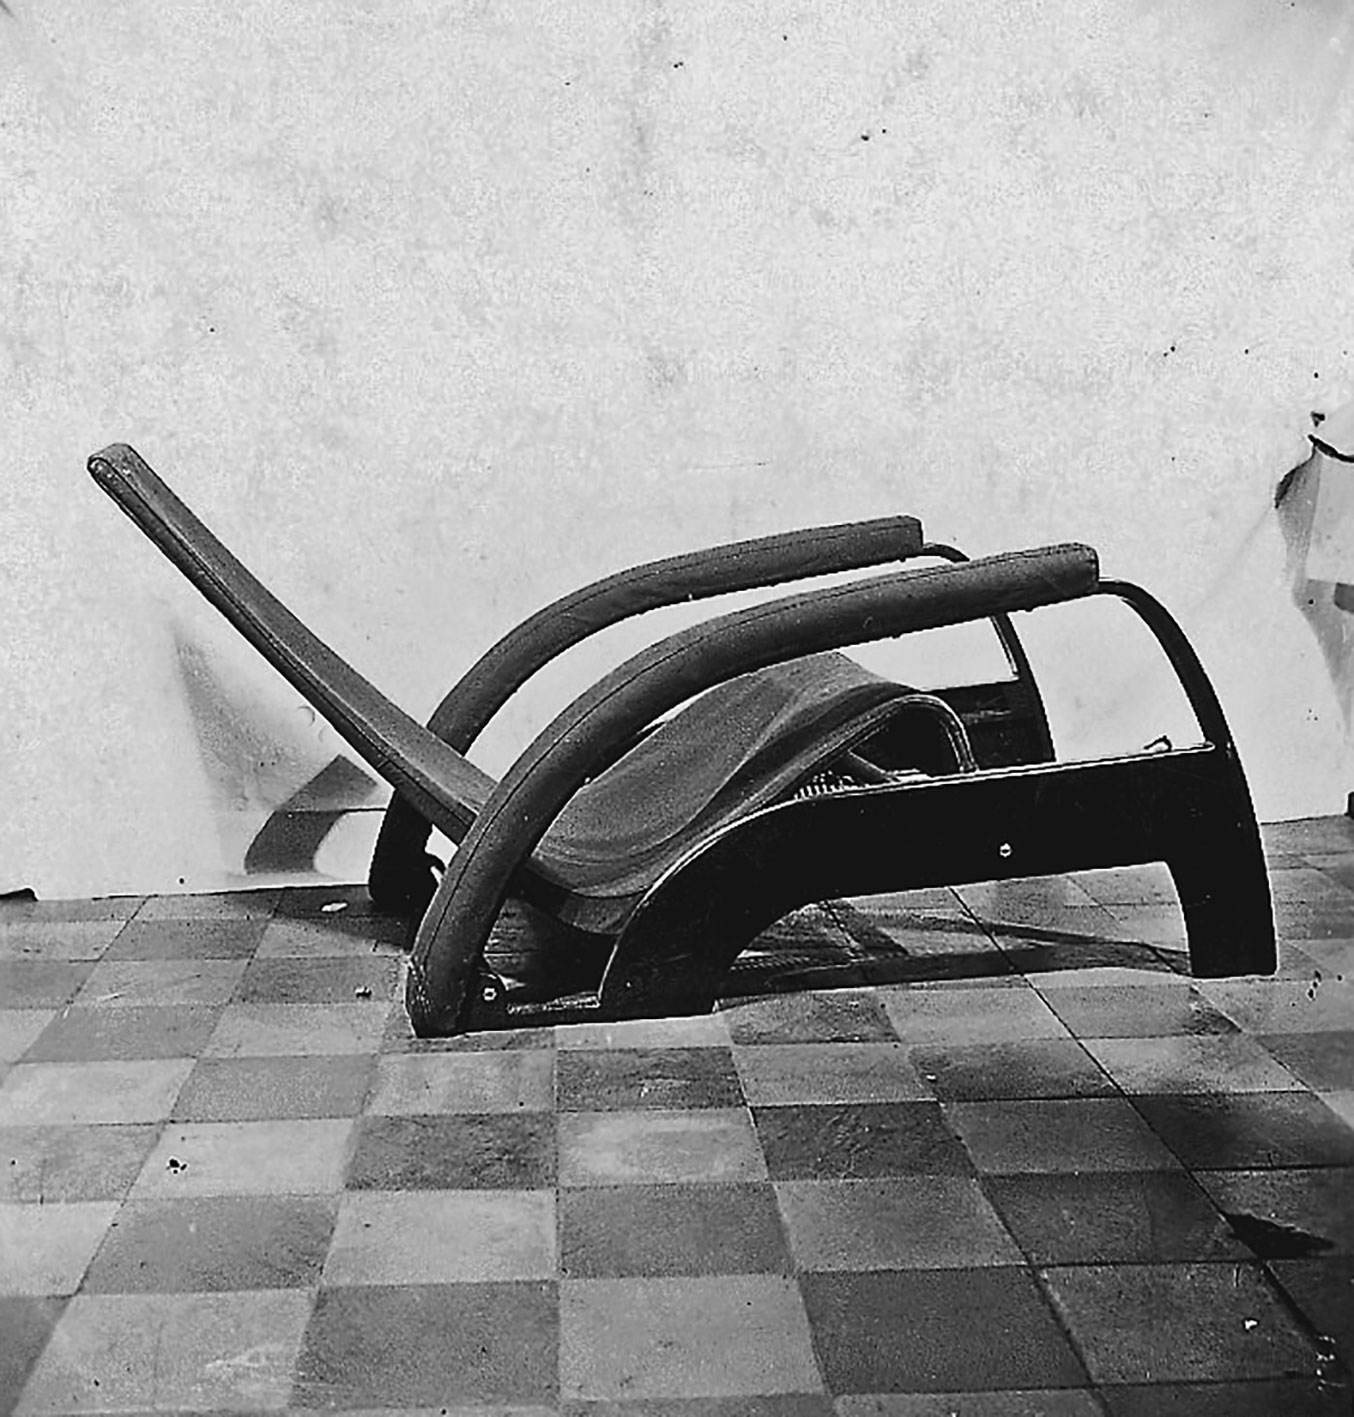 02-02-03-gd repos-04Grand Repos reclining armchair, 1930. Demonstration of the various positions of the sliding seat on its guide rails. Prototype in the workshop, ca. 1932.